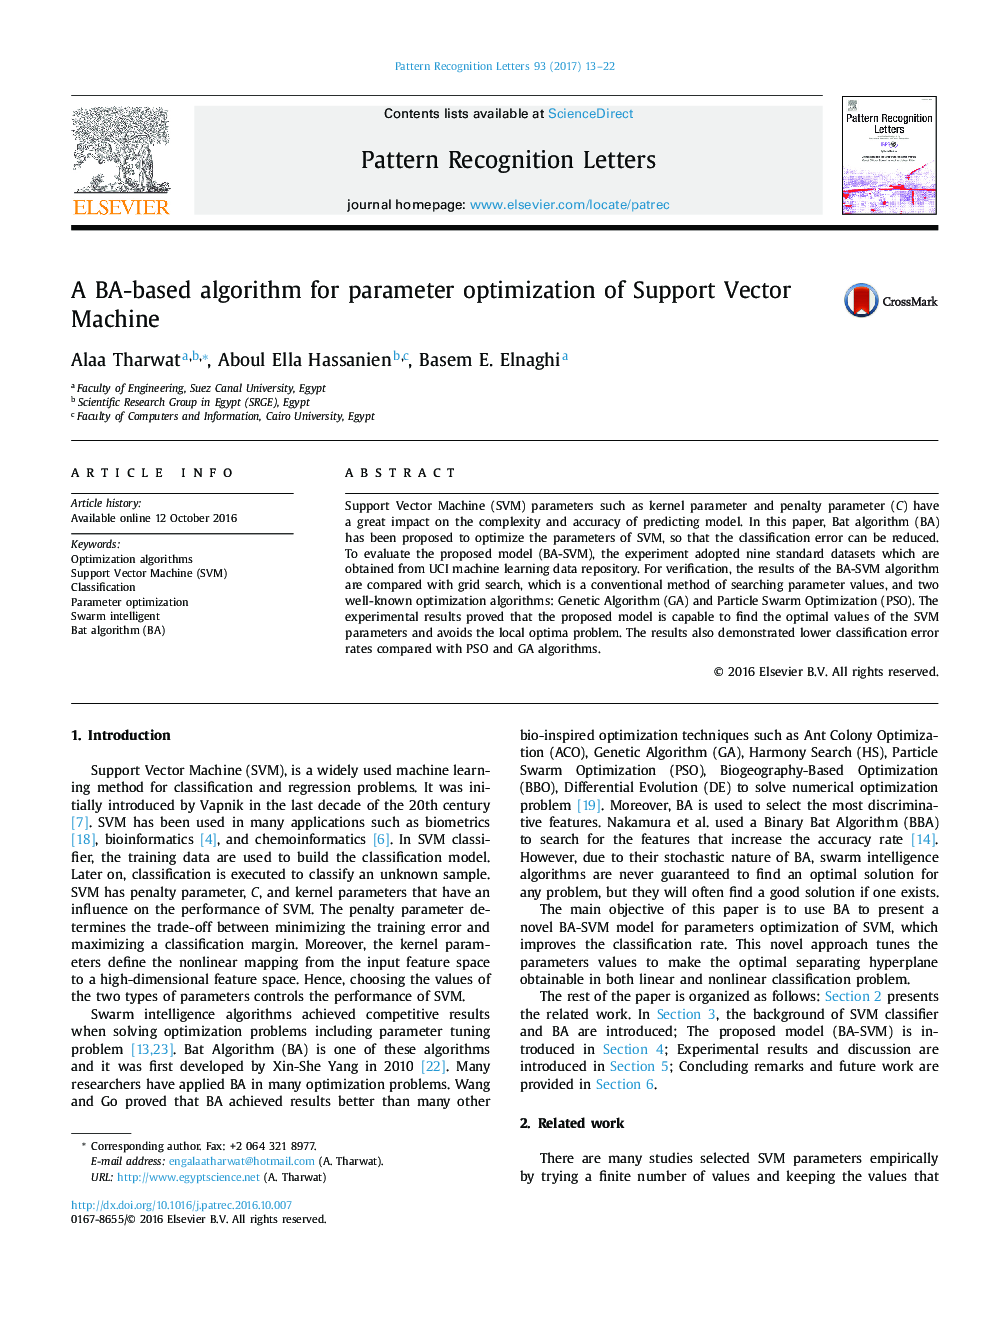 A BA-based algorithm for parameter optimization of Support Vector Machine